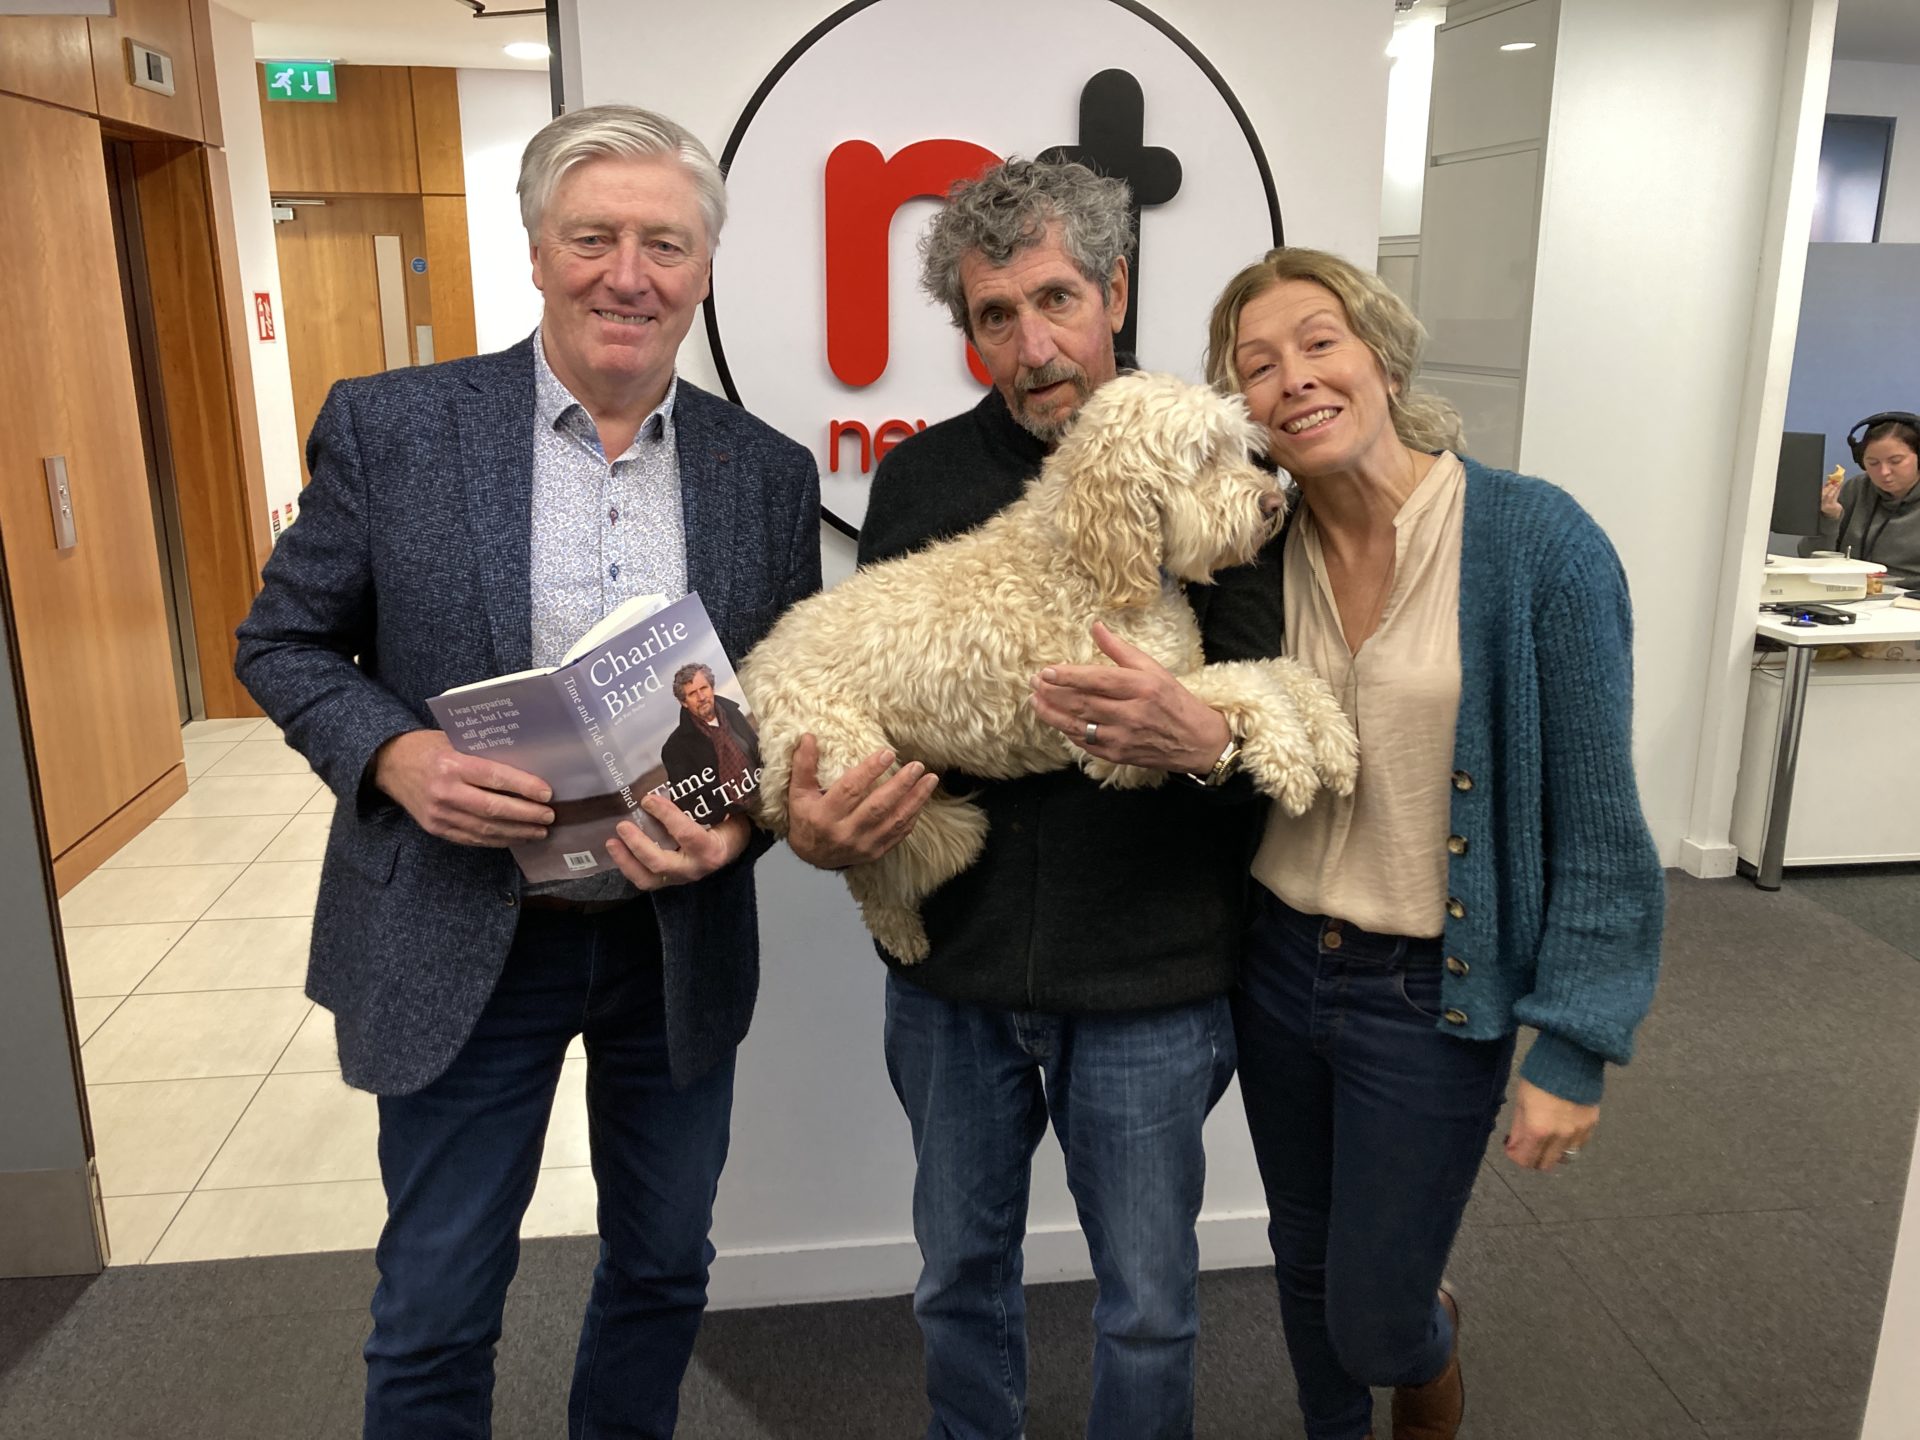 Pat Kenny, Charlie Bird, with Tiger and his wife Claire at the Newstalk studios in Dublin